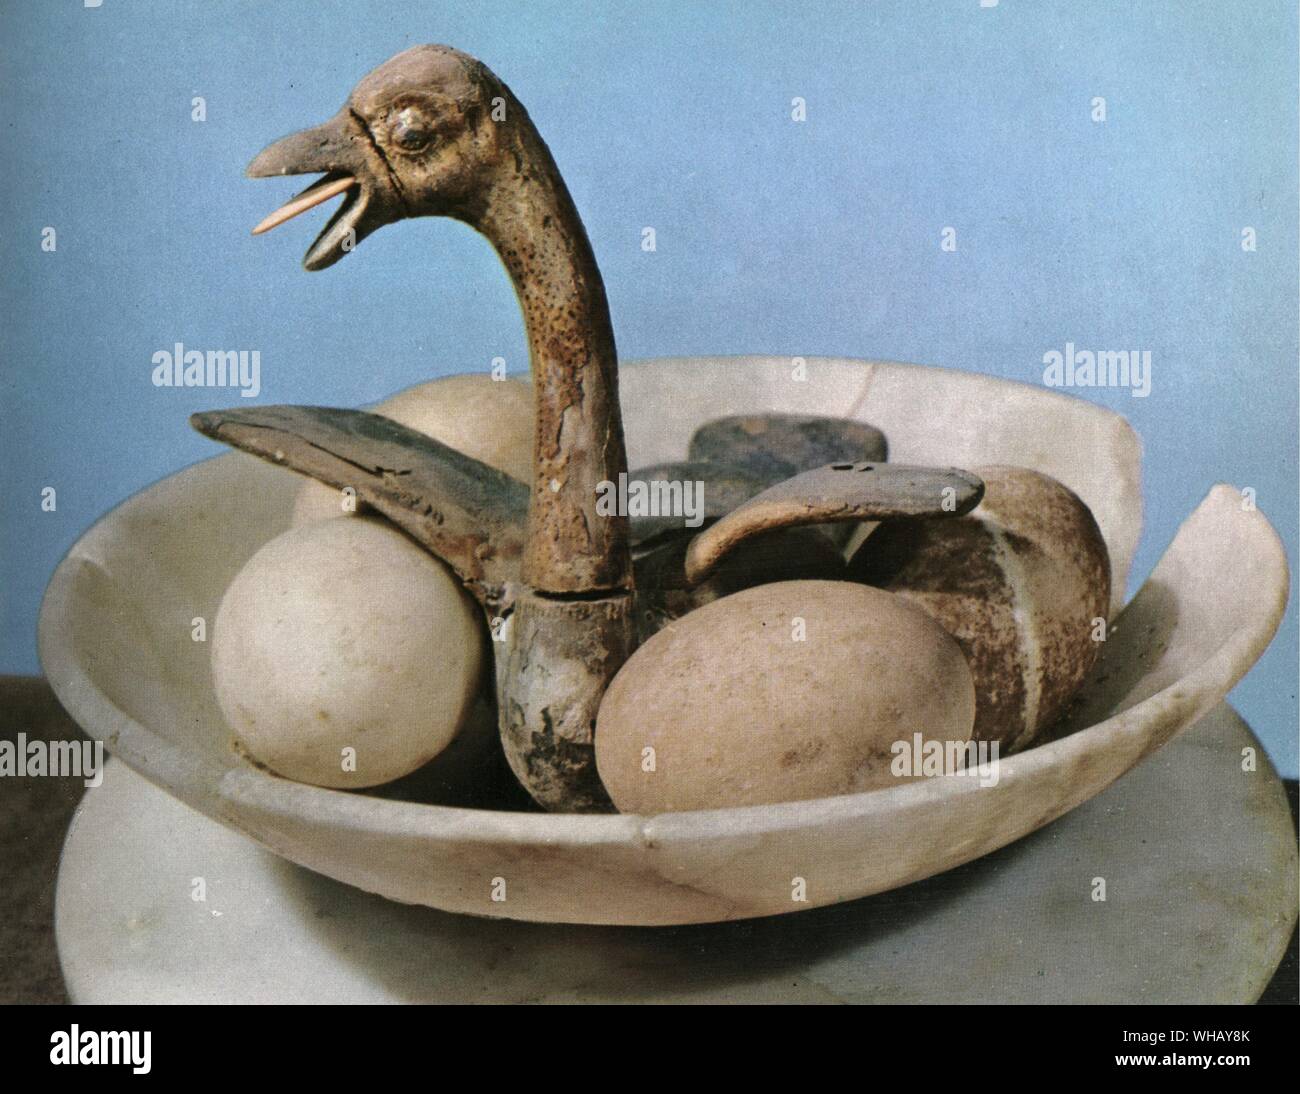 The lid of the alabaster jar, decorated with a small bowl showing a bird in its nest having just emerged from its egg.. Tukankhamen, by Christiane Desroches Noblecourt, page 227. Stock Photo